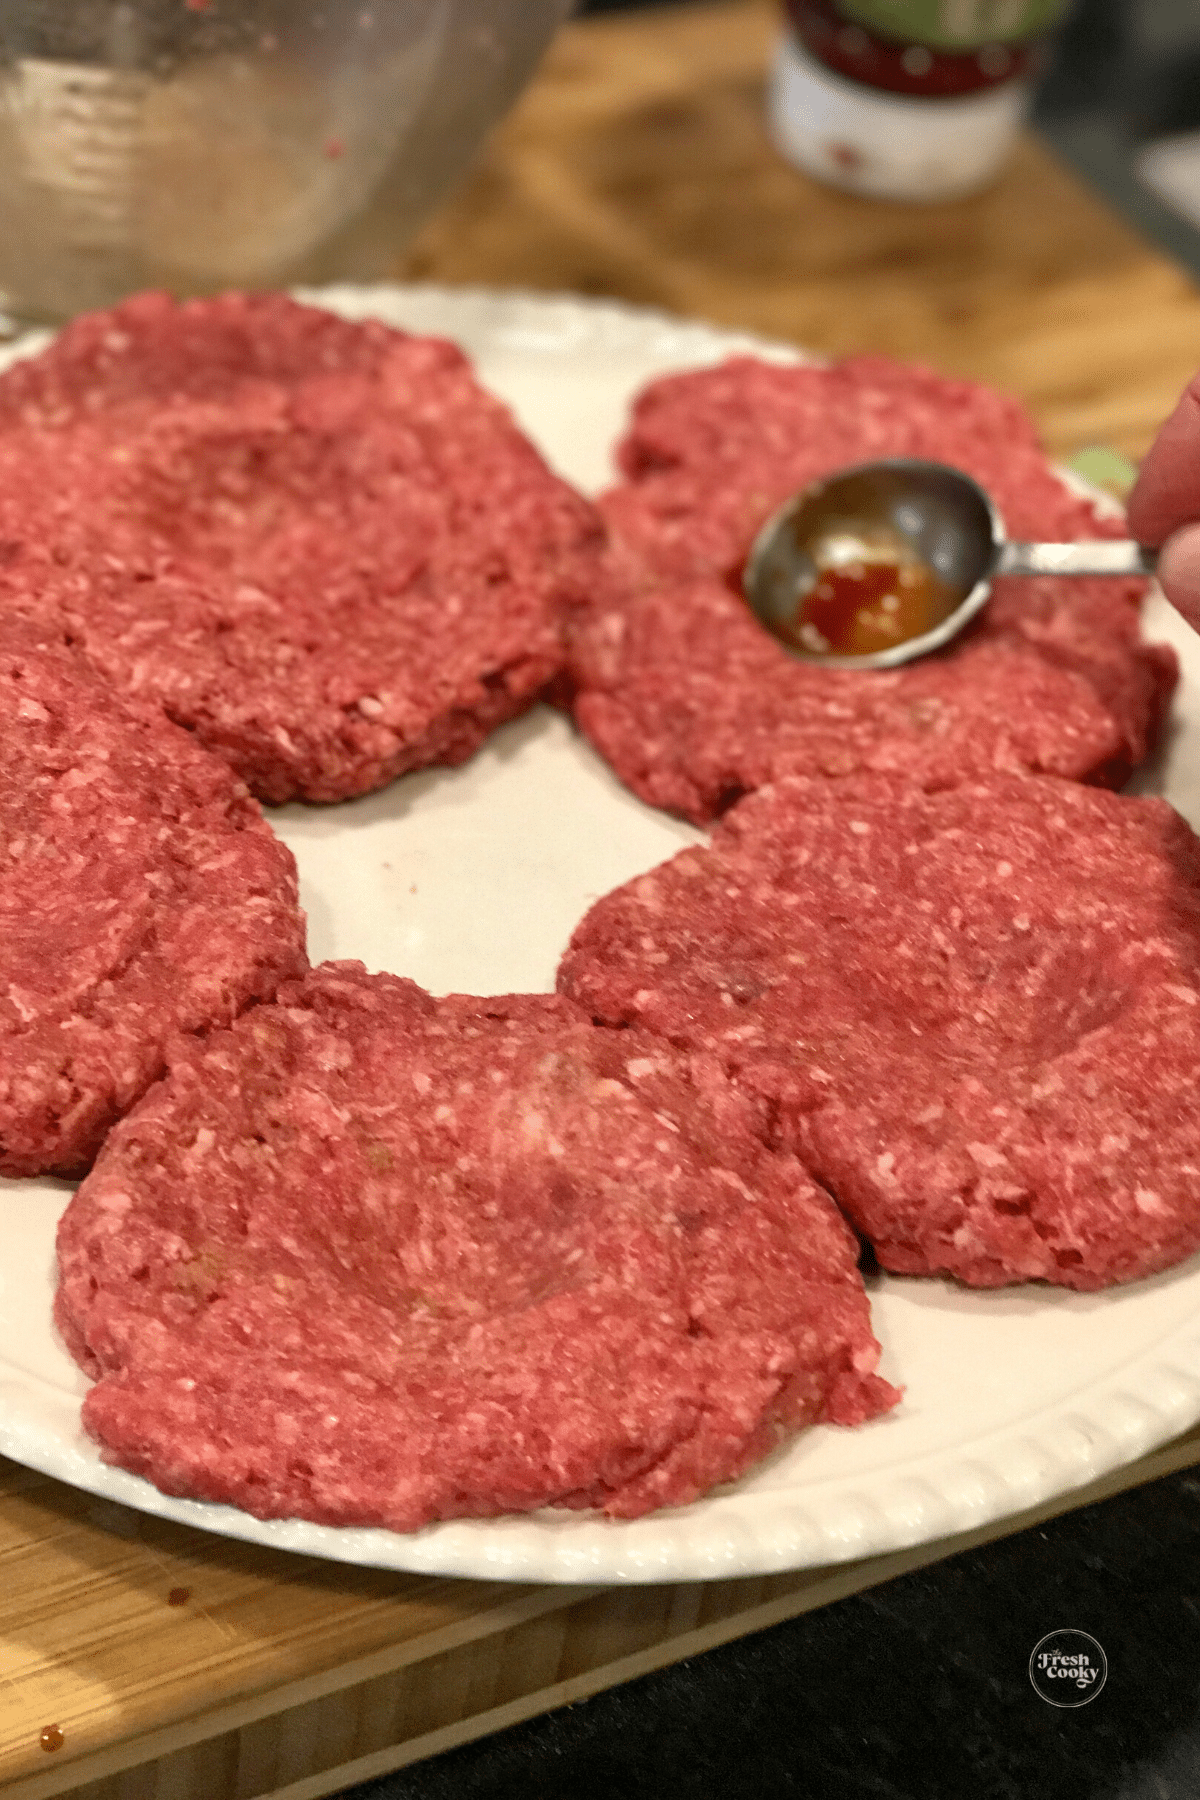 Pressing wells into center of burgers with tablespoon. 